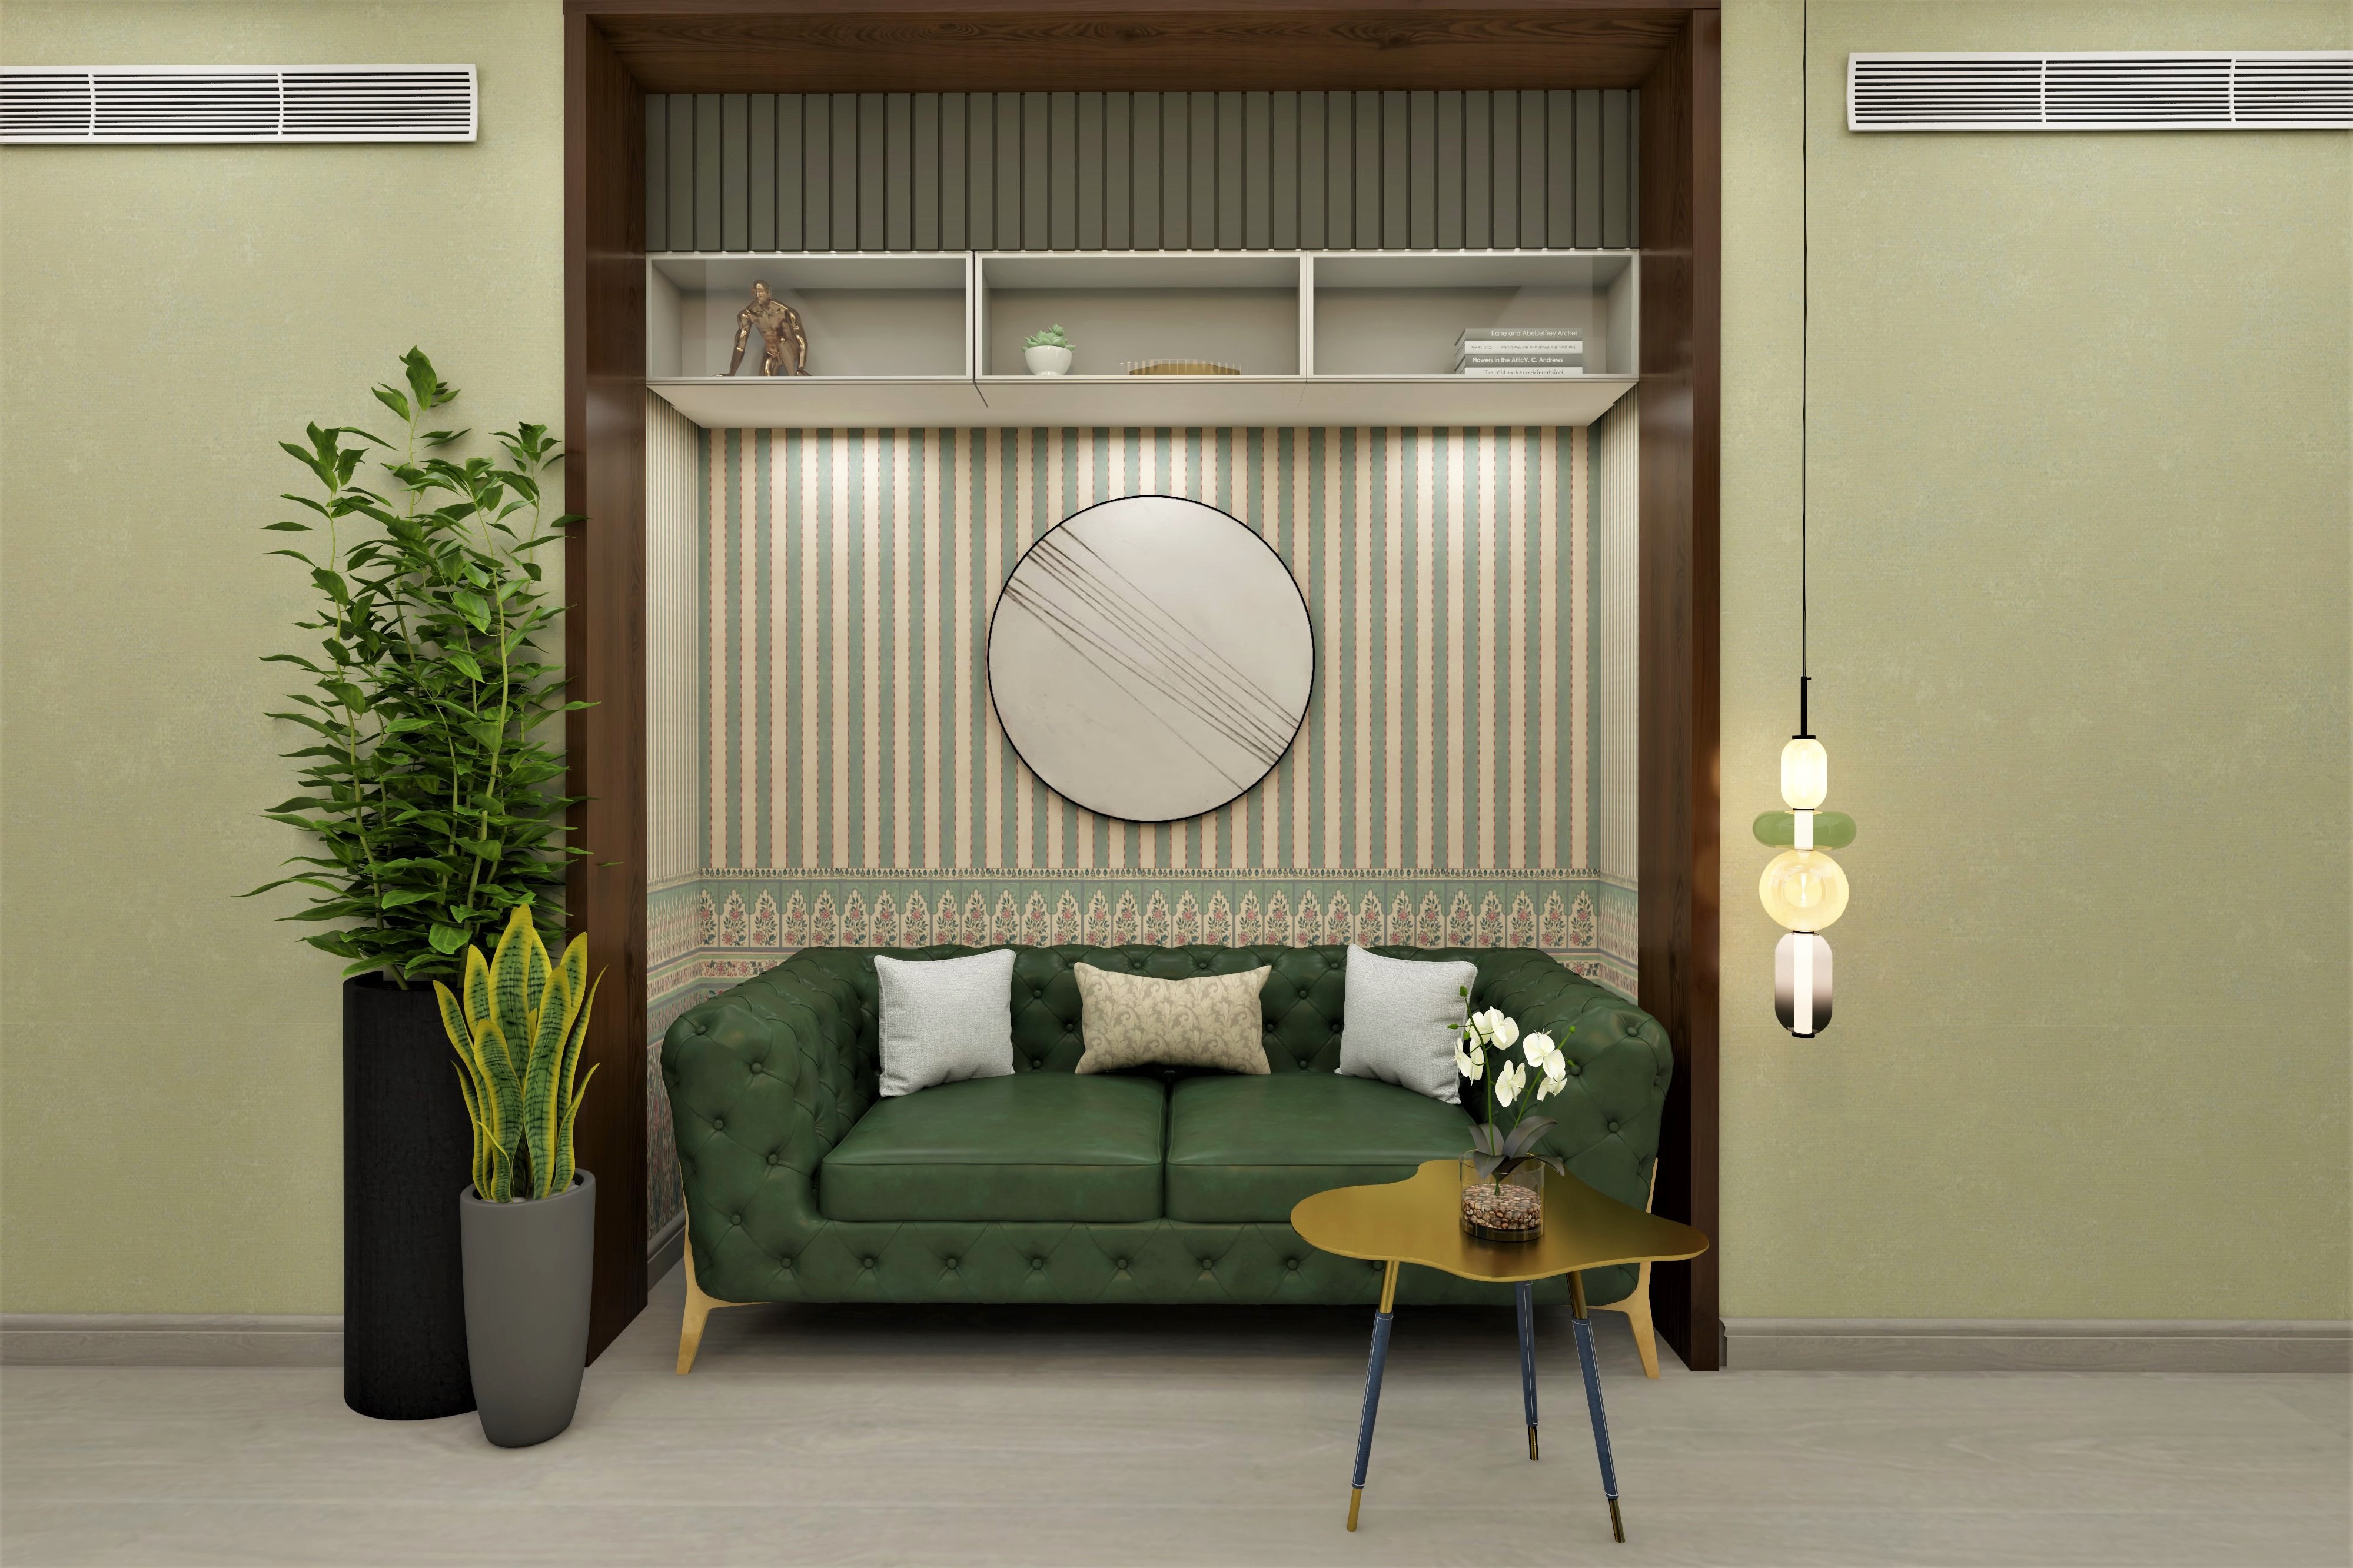 Modern entryway design with green sofa and pendant lights-Beautiful Homes